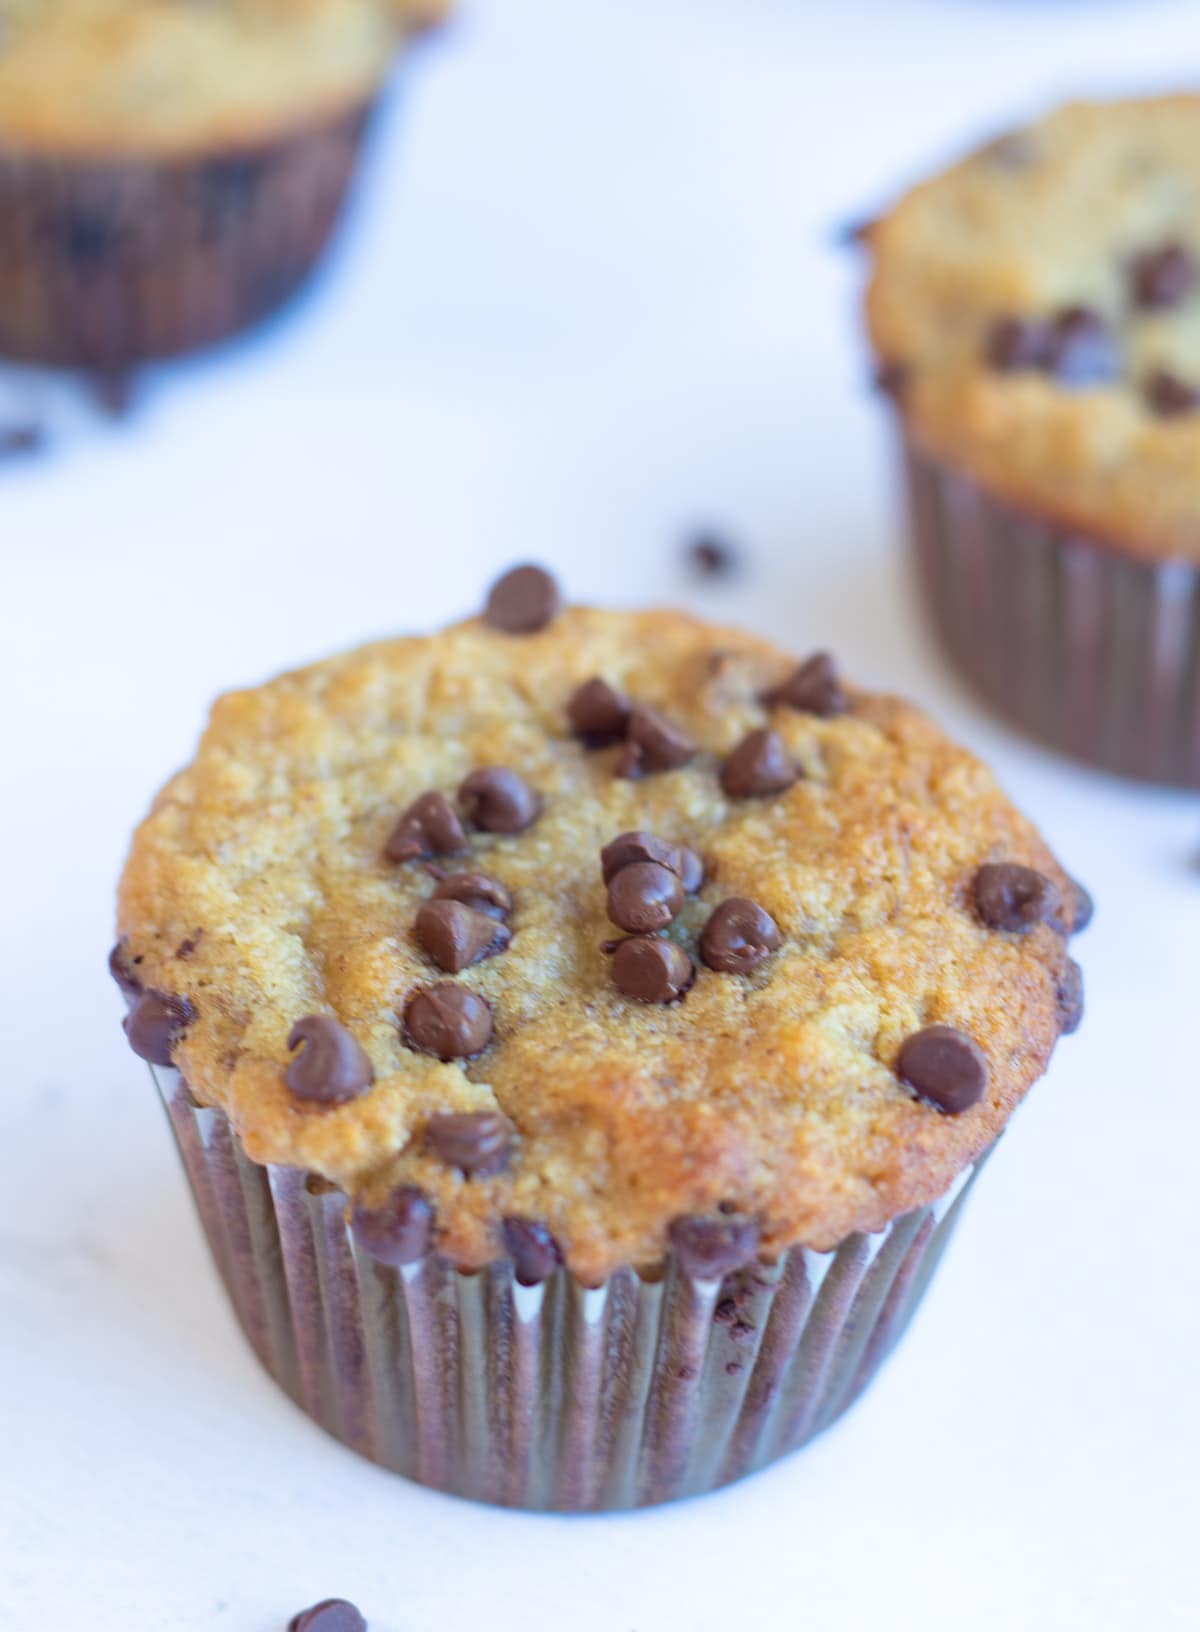 Banana chocolate chip muffins on a white table